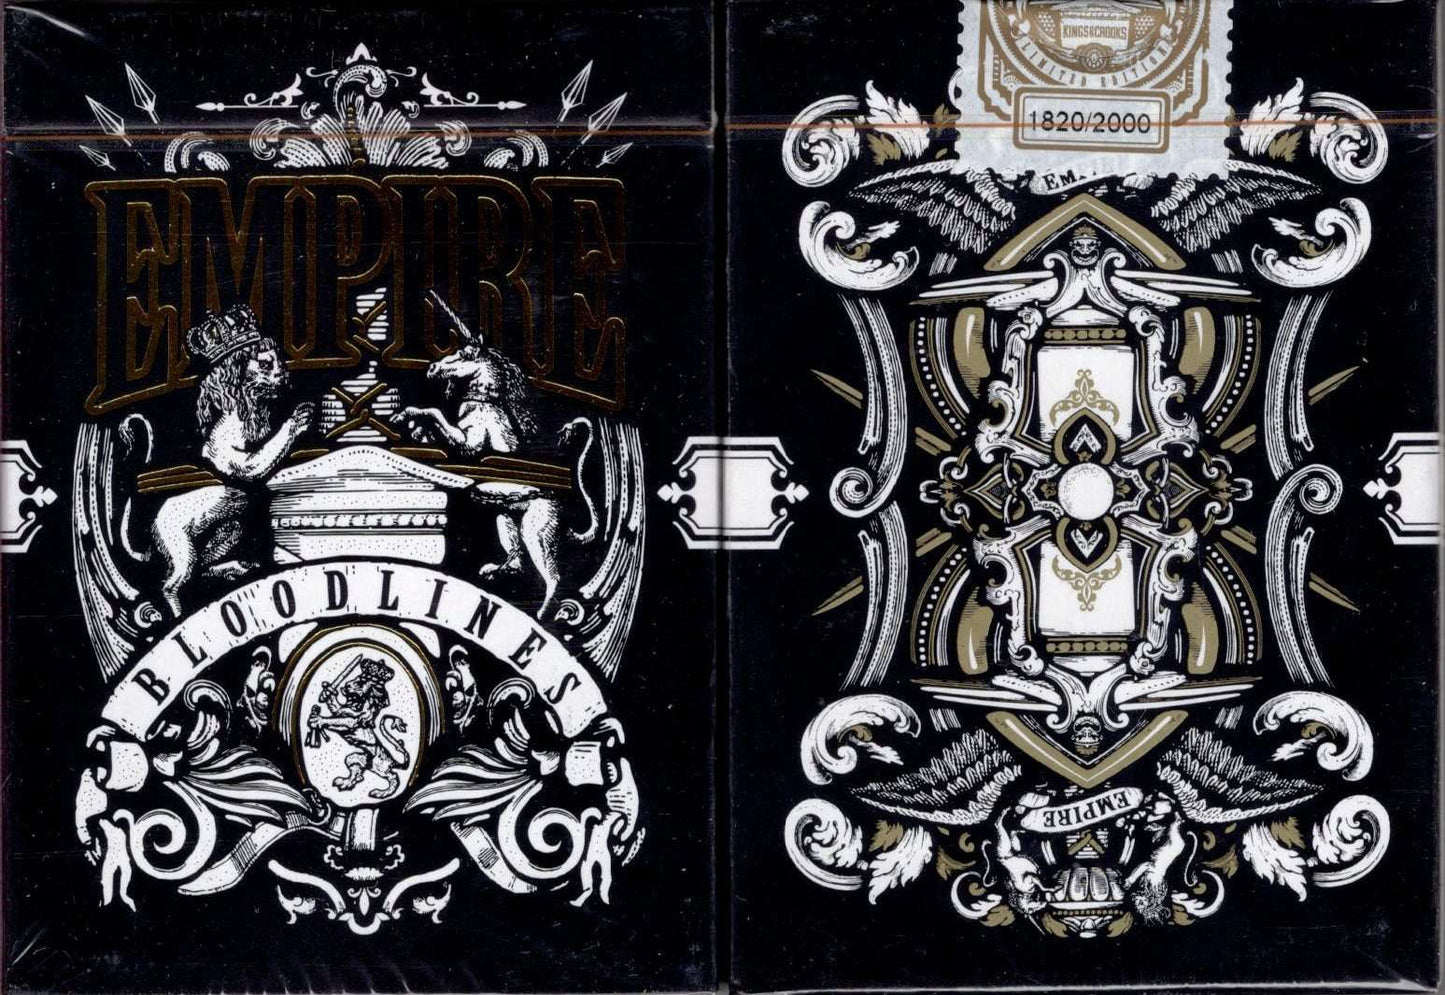 PlayingCardDecks.com-Empire Bloodlines Black Gold Playing Cards LPCC